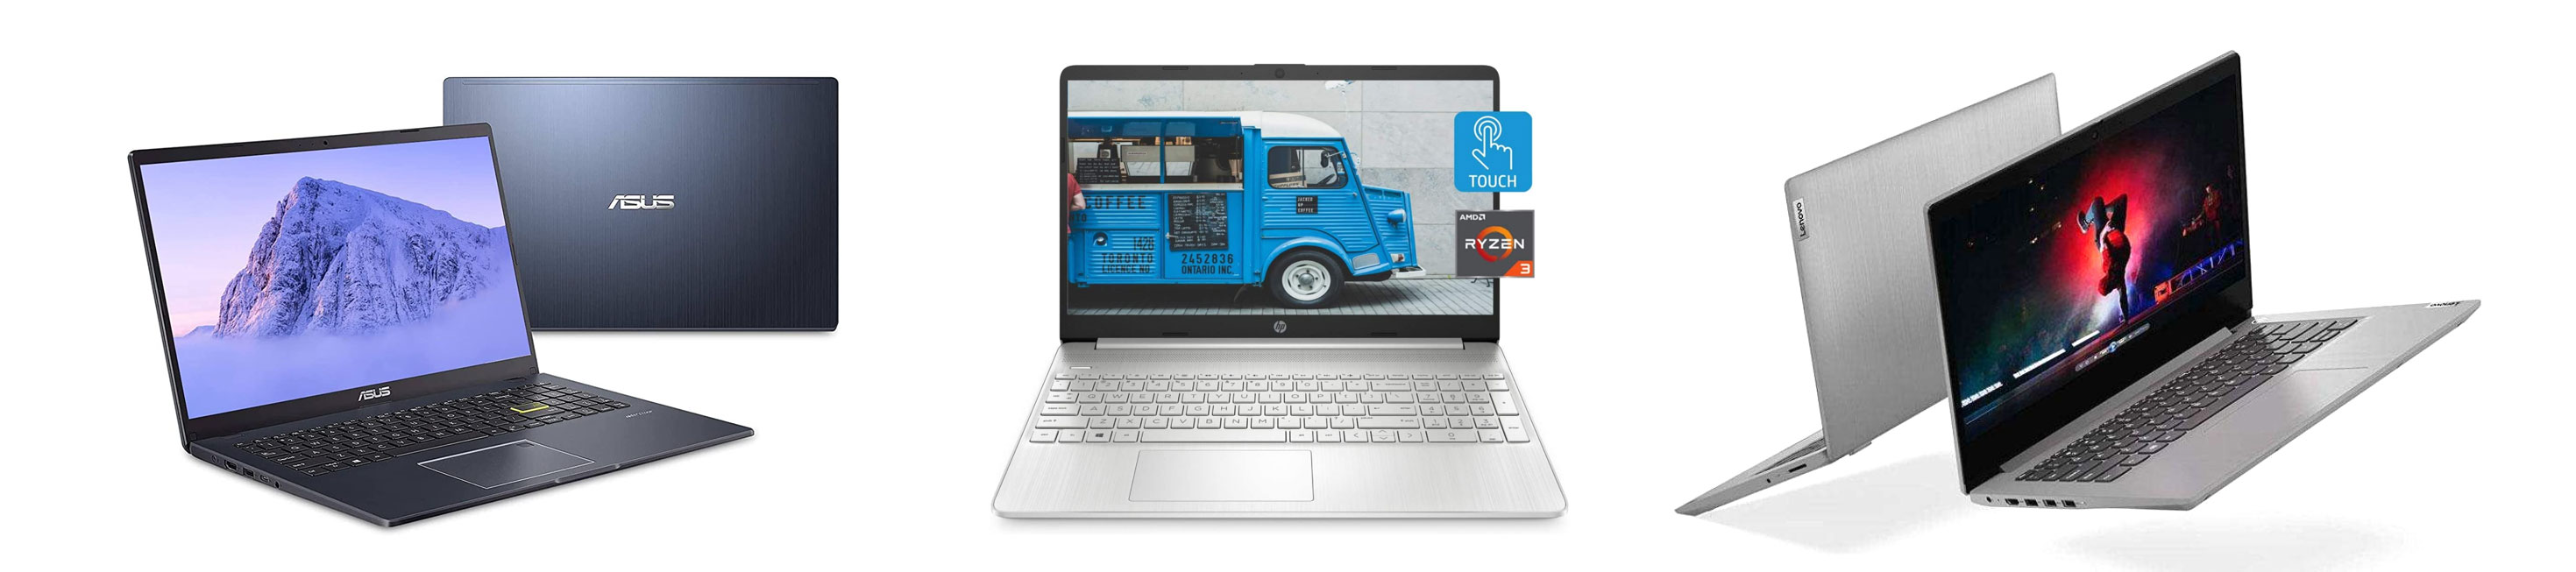 Budget Windows laptops available for $300 to $500